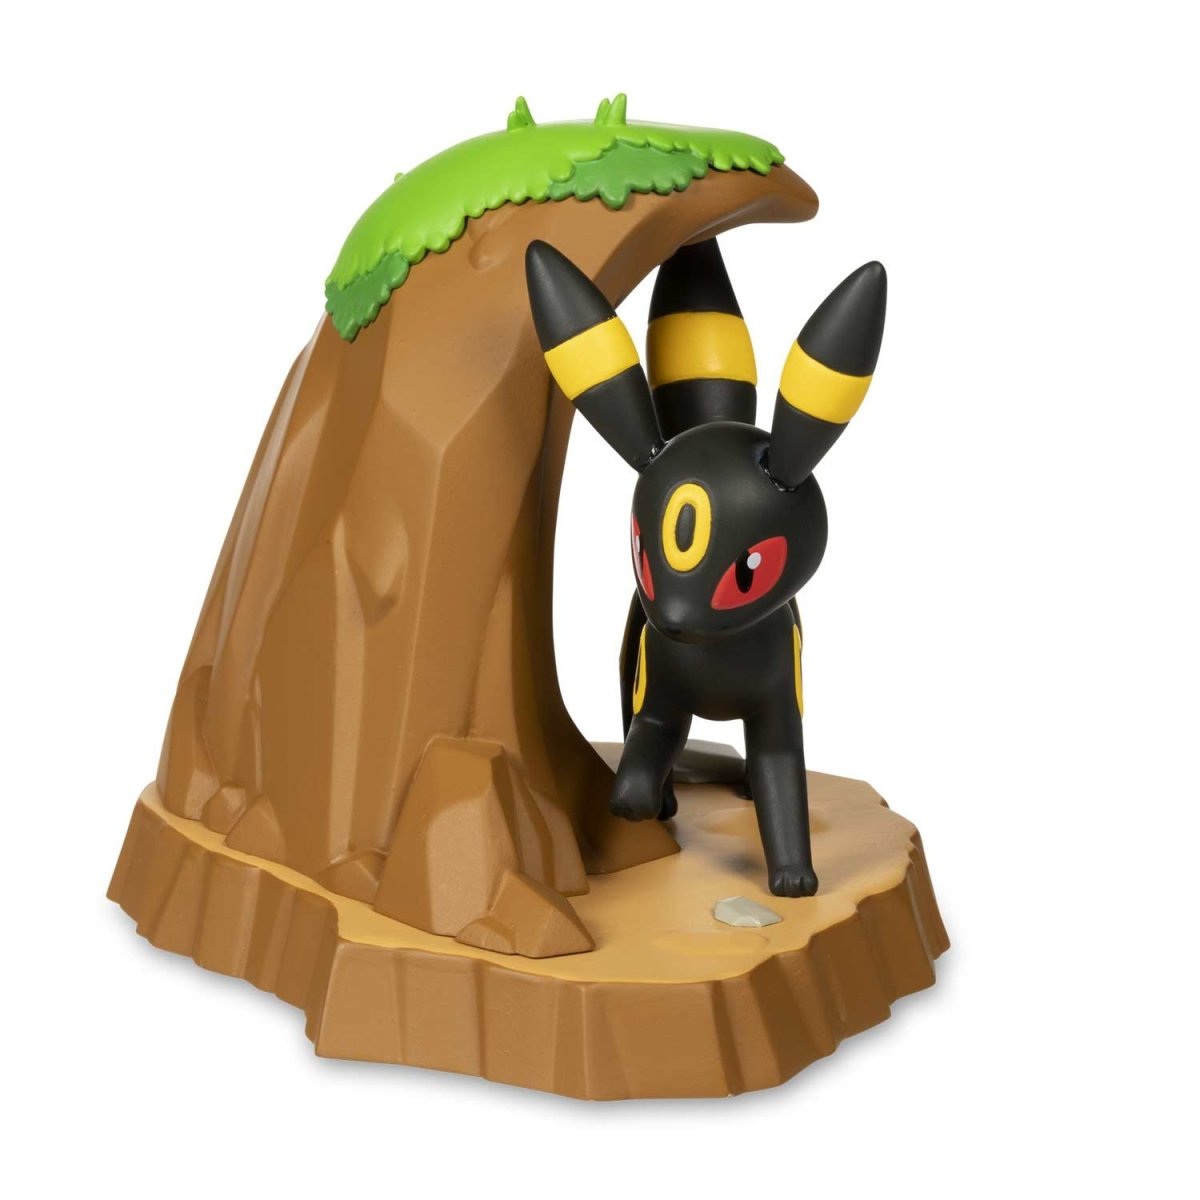 Funko Vinyl Figure-Other: Pokémon - An Afternoon with Eevee & Friends:  Umbreon - Pokemon Company Int'l (PCI) (Exclusive) for sale online